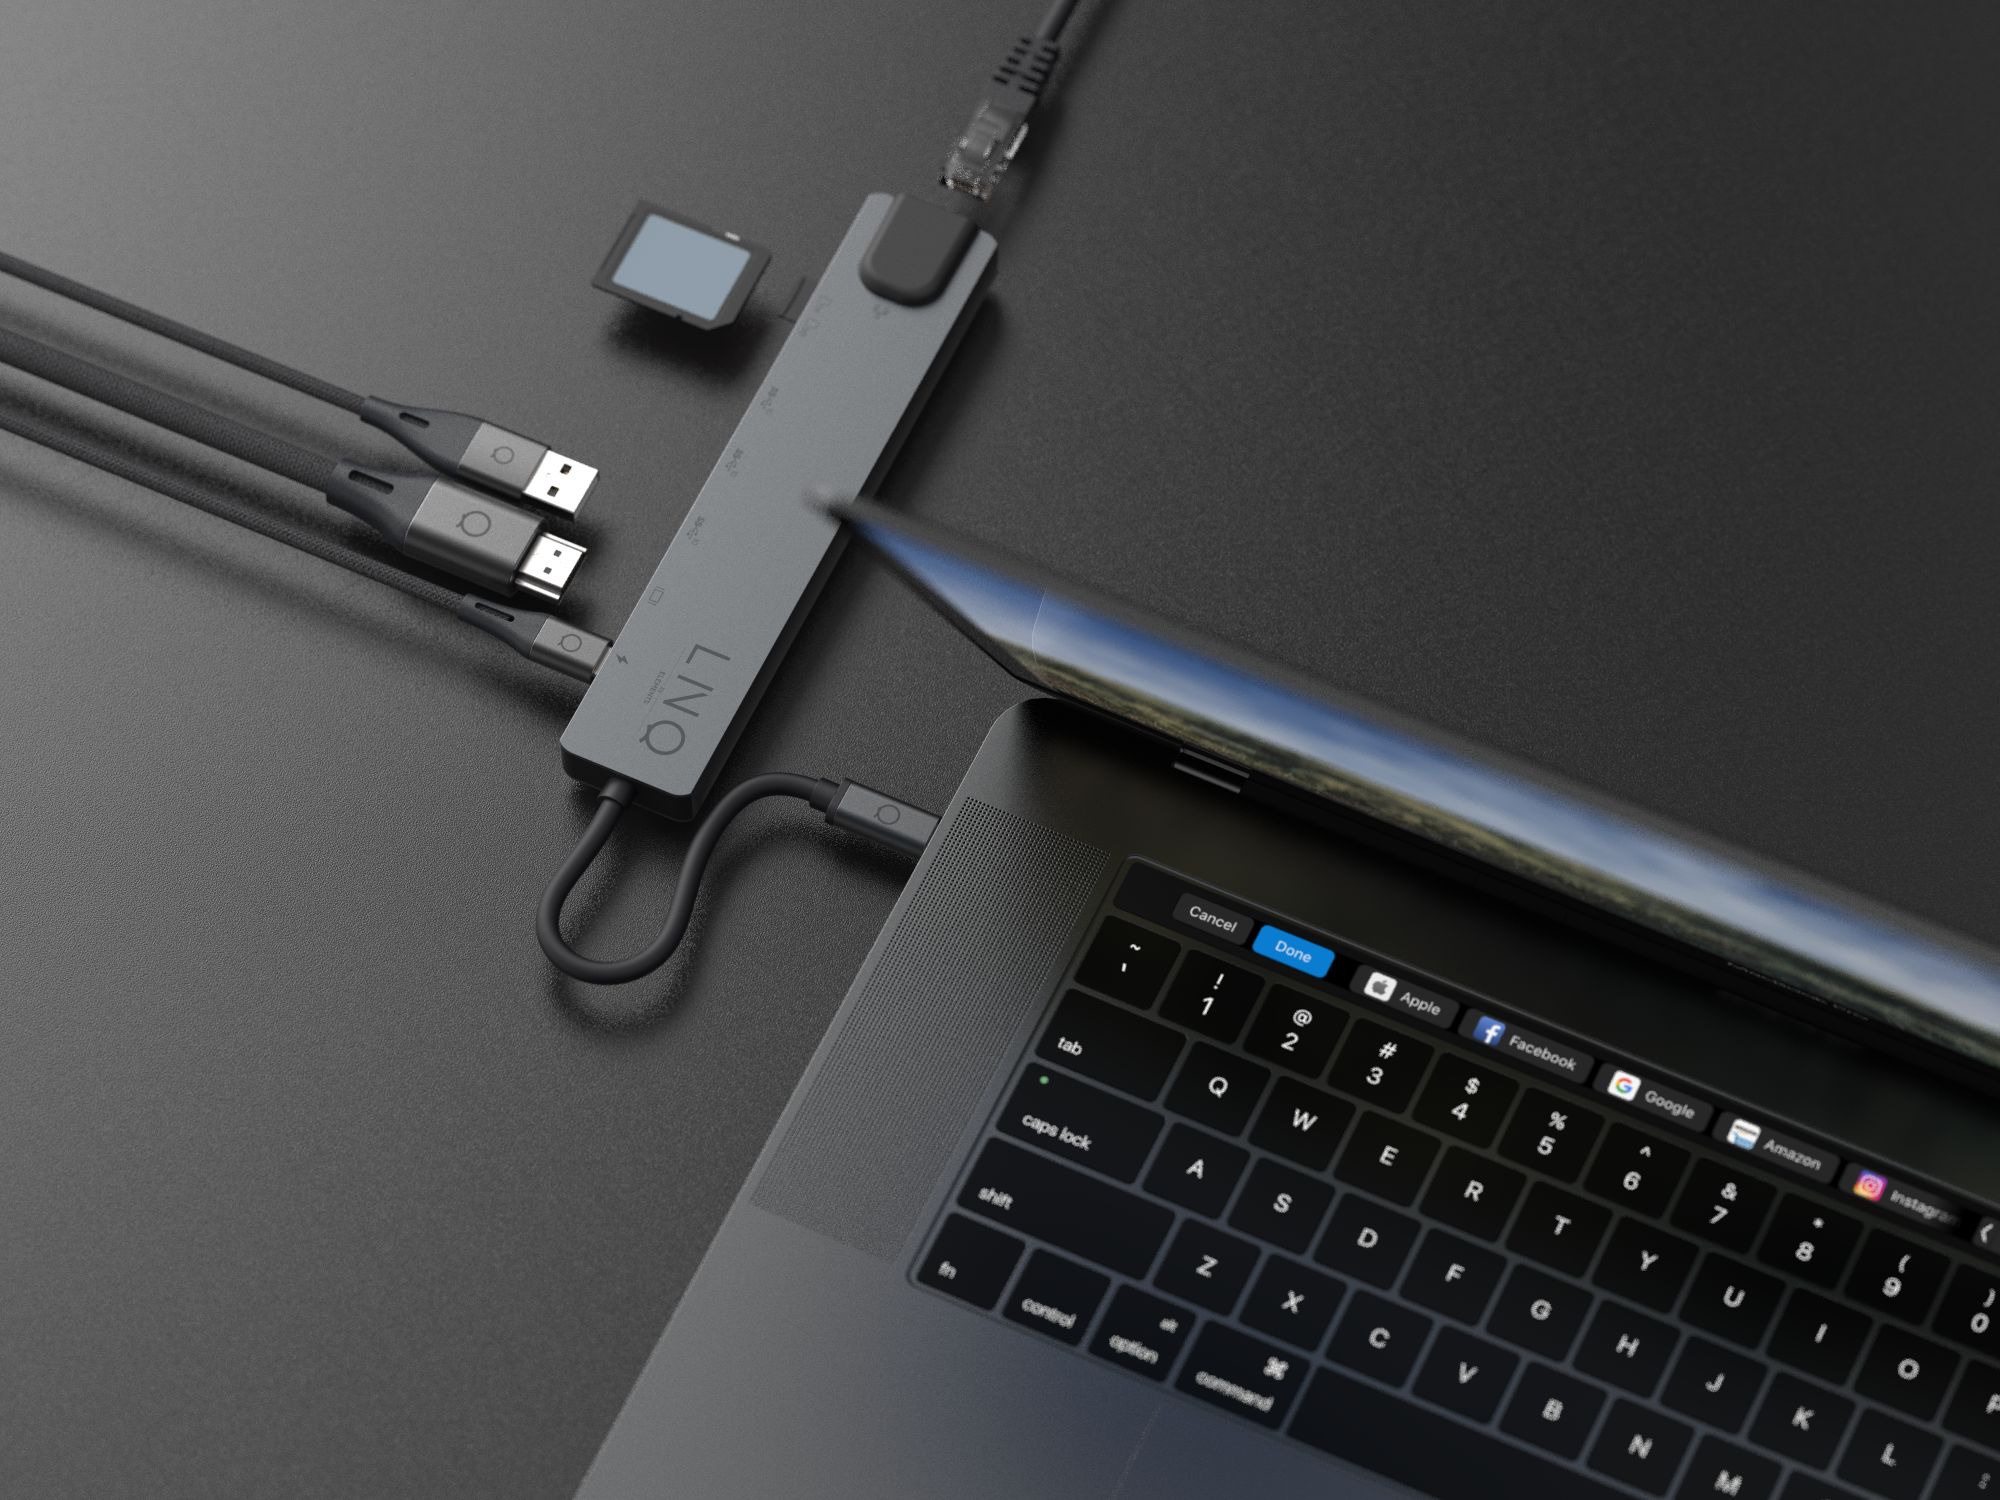 LINQ Adapter 8in1 PRO USB-C Multiport